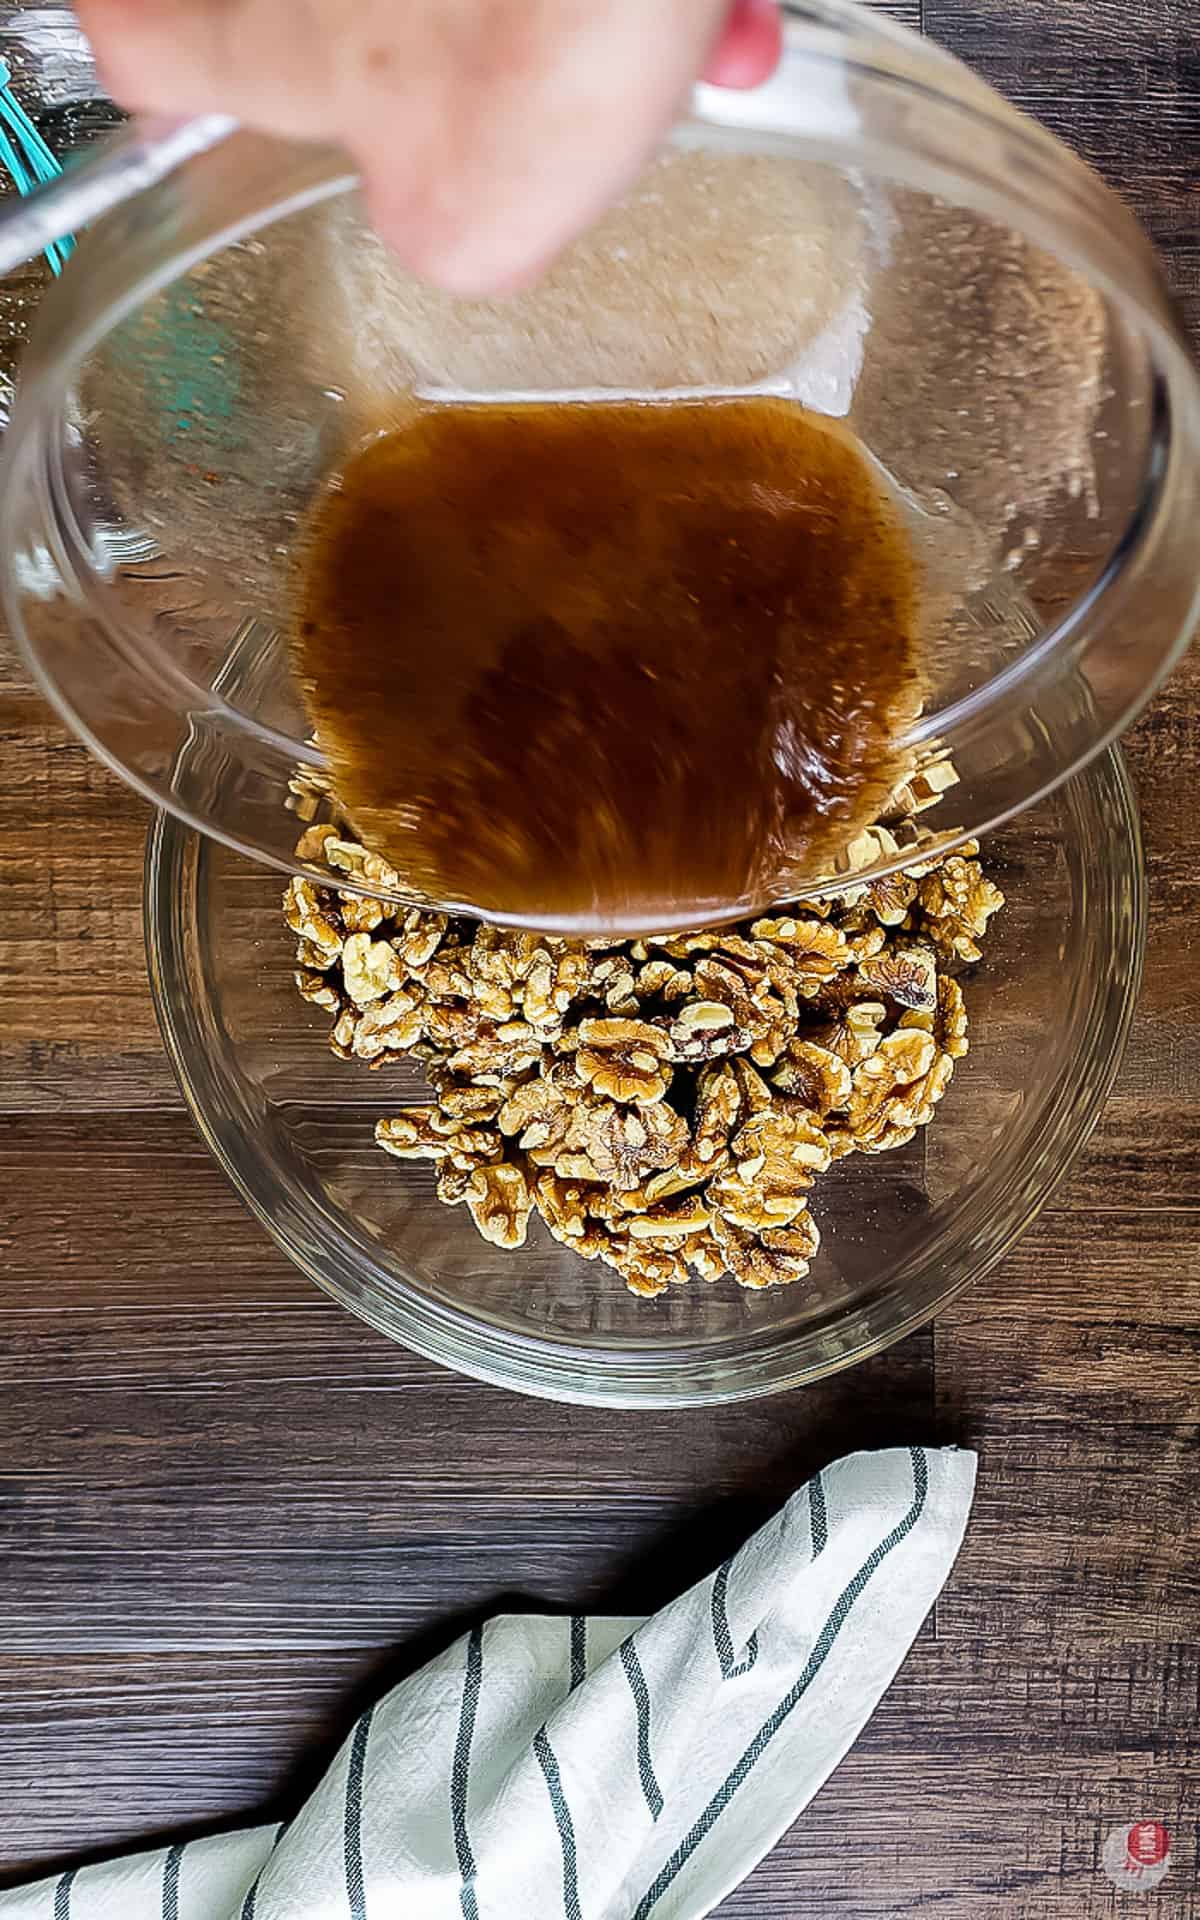 pour over the walnuts